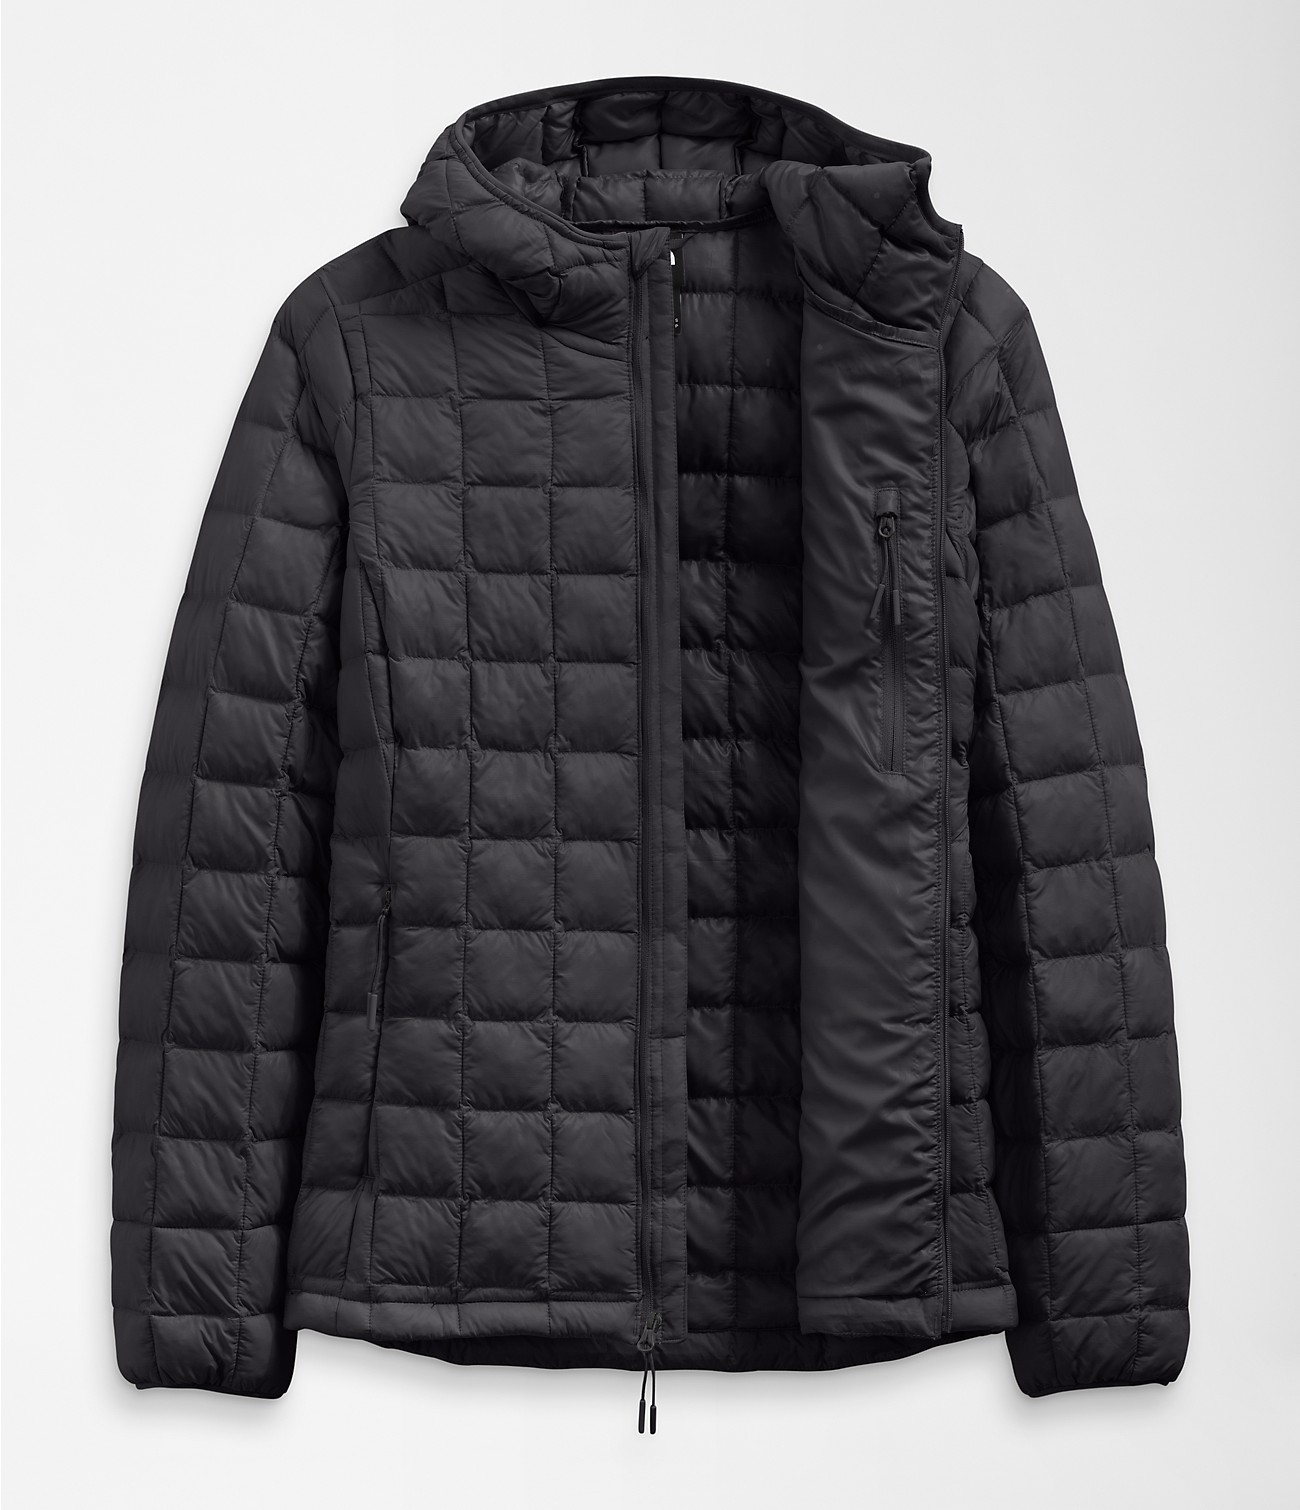 Unlock Wilderness' choice in the North Face Vs Tommy Hilfiger comparison, the ThermoBall™ Eco Hoodie 2.0 by The North Face